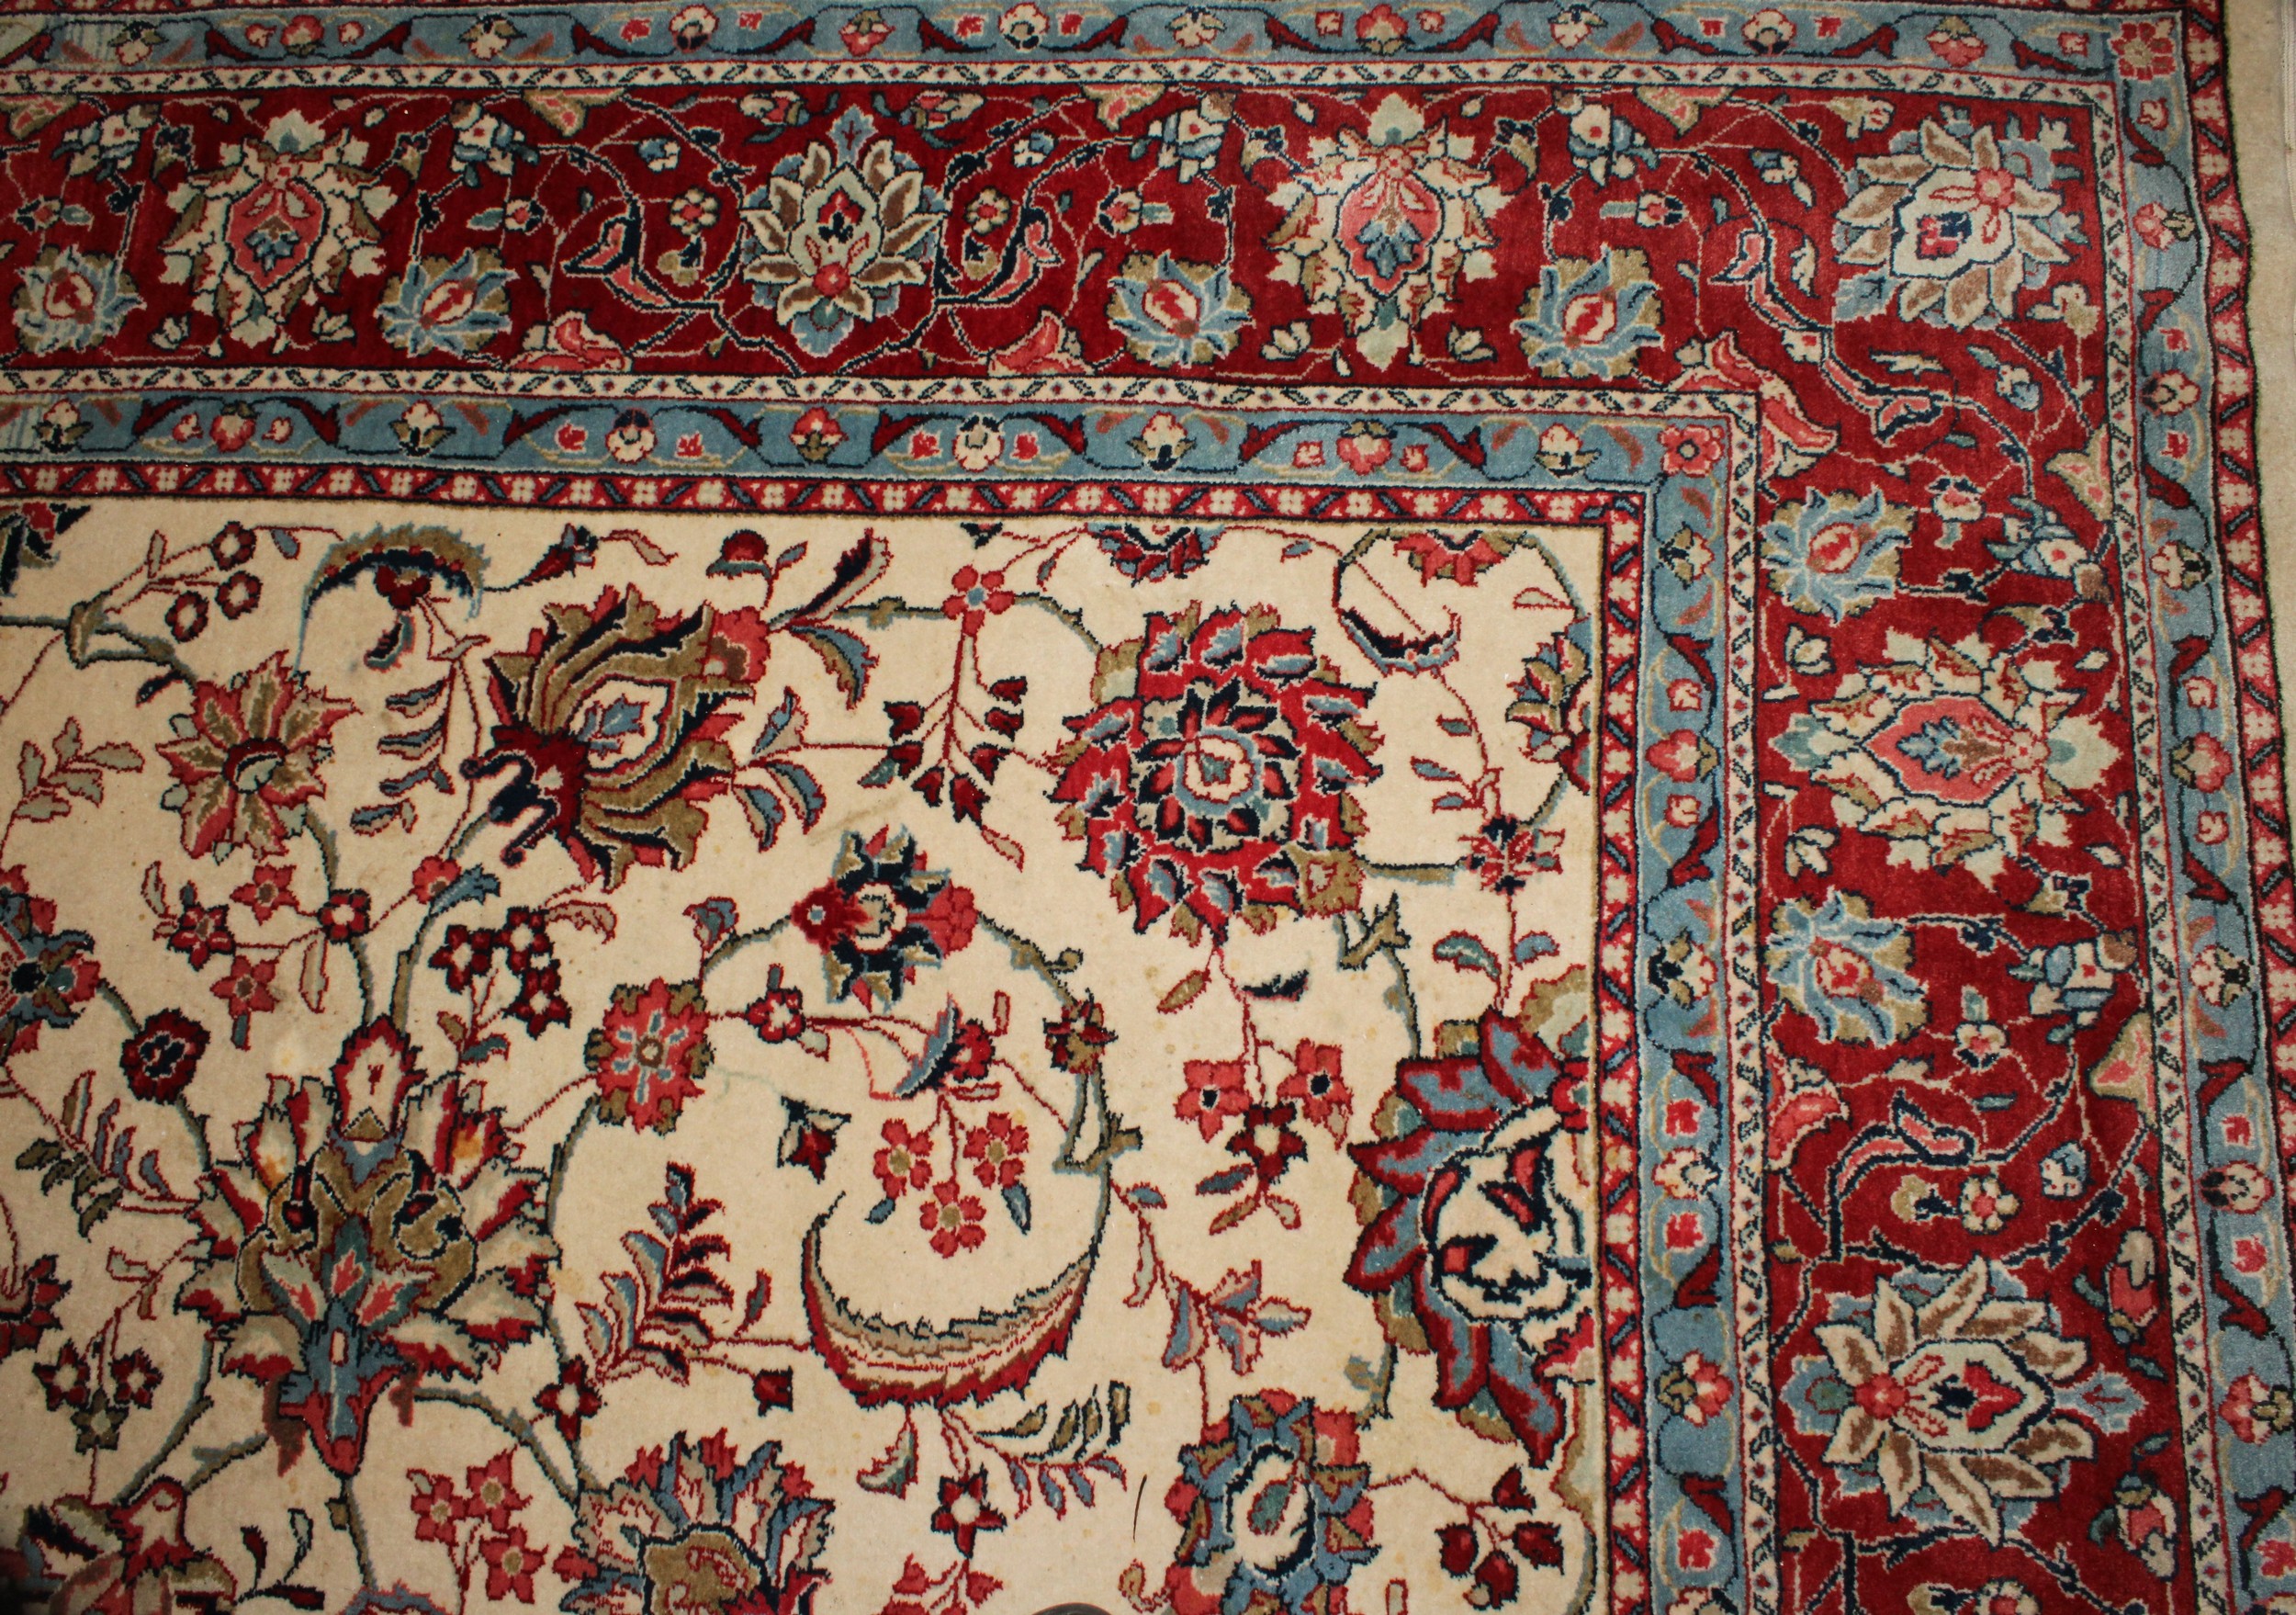 An Iranian Isfahan type wool rug or carpet, 366.5cm x 268cm - Image 2 of 4